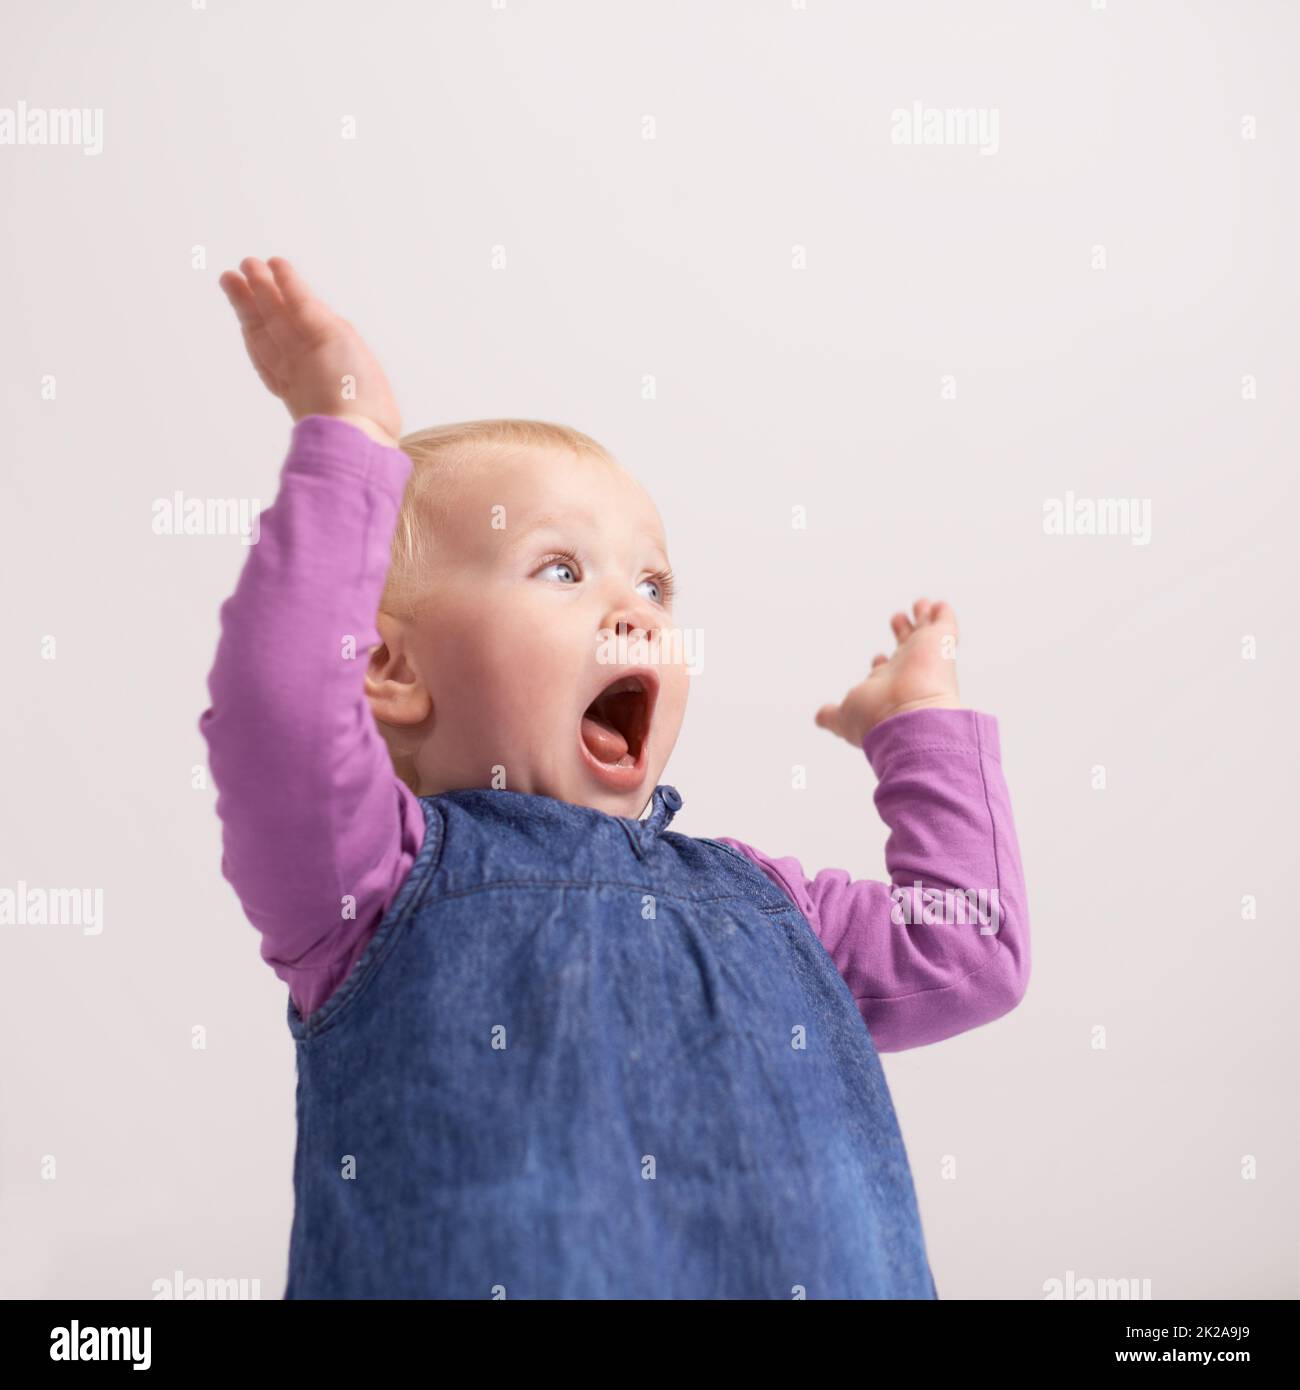 Hes the cutest little boy. A shot of a baby girl with a startled expression. Stock Photo